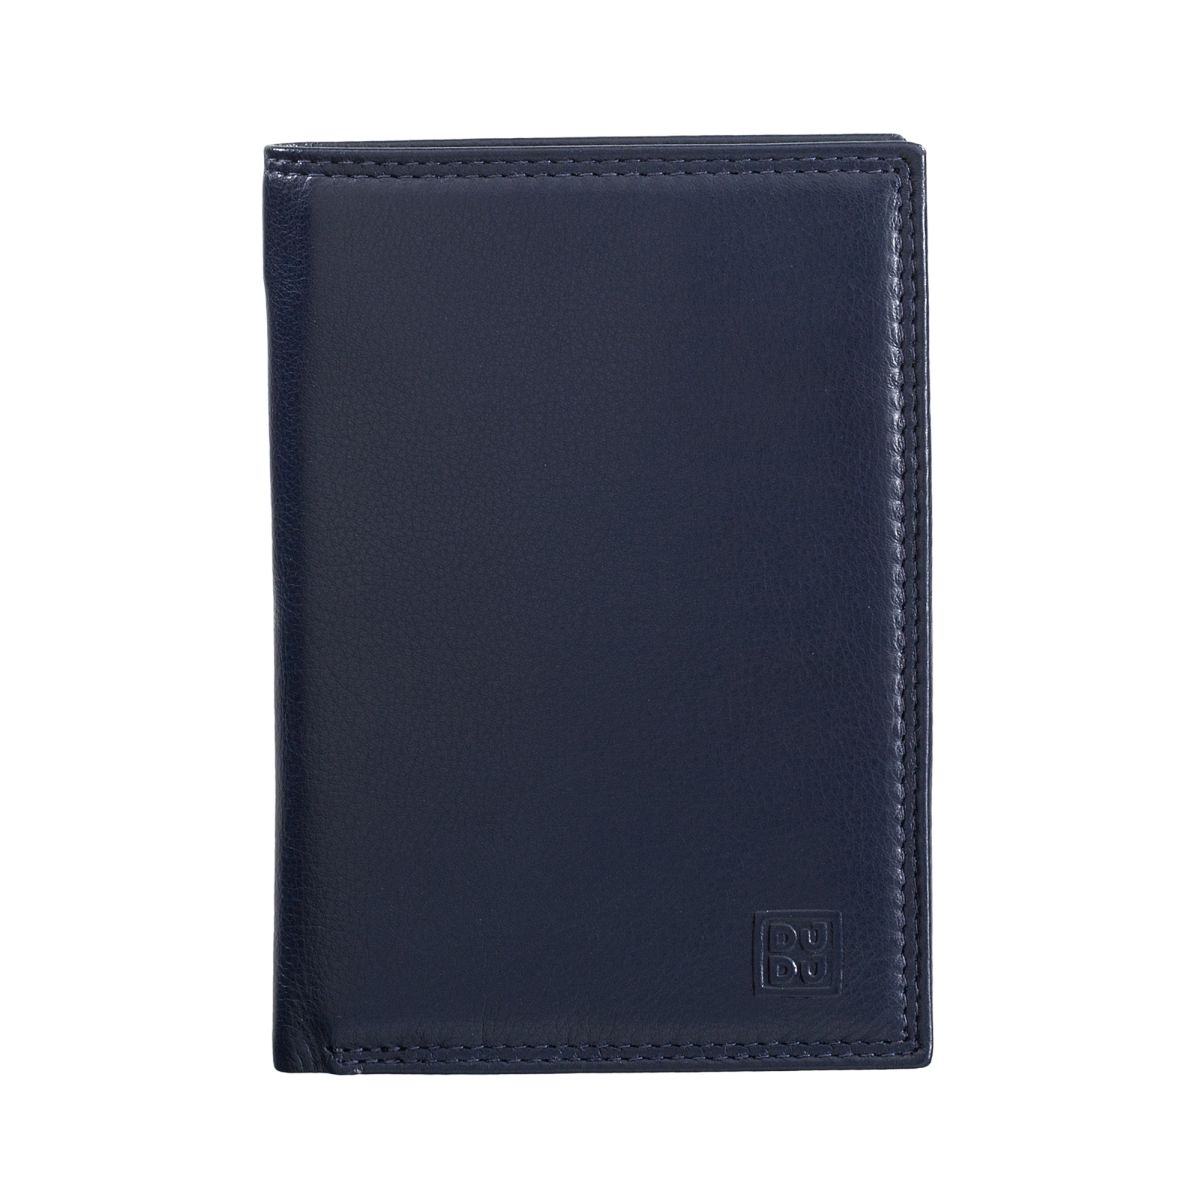 DuDu Mans leather folding wallet with inner zip - Navy